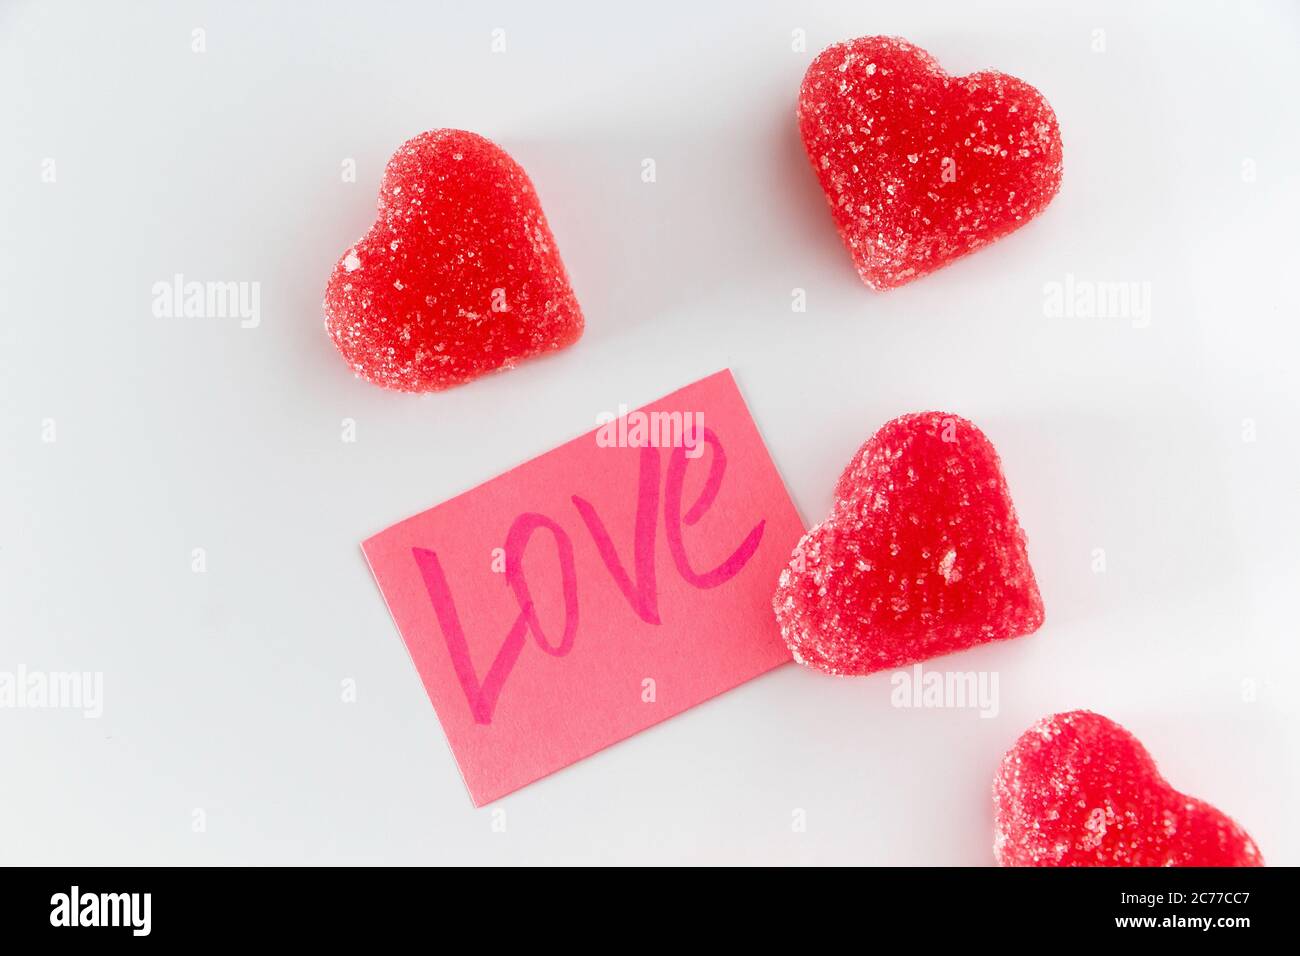 Pink sticker with the word love and red fruit jelly in the shape ...